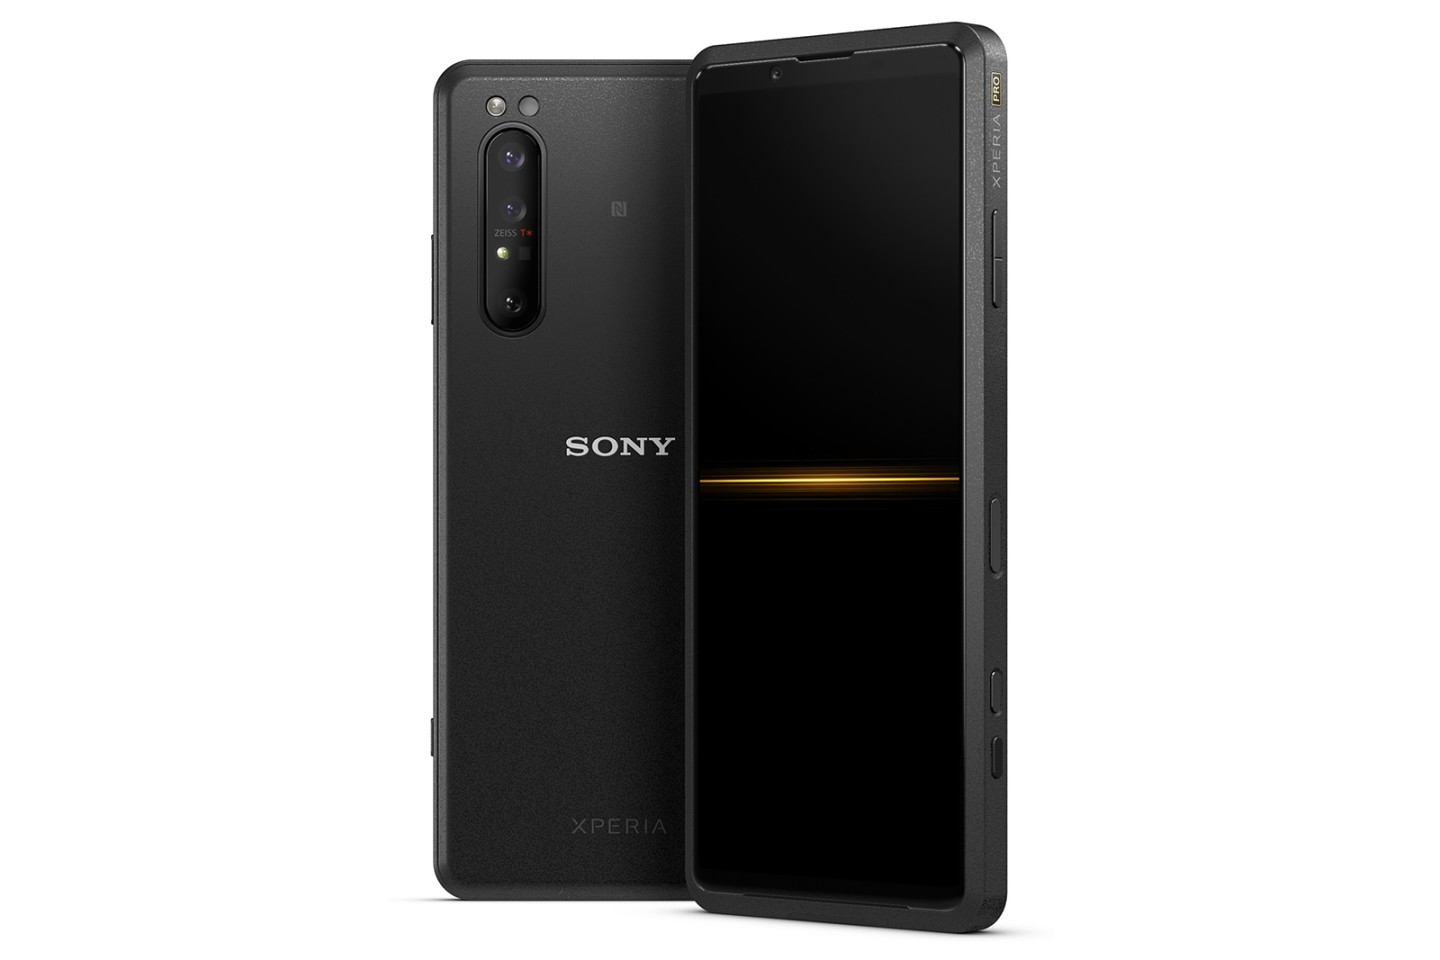 The Xperia Pro is based on the Xperia 1 Mark II launched last year